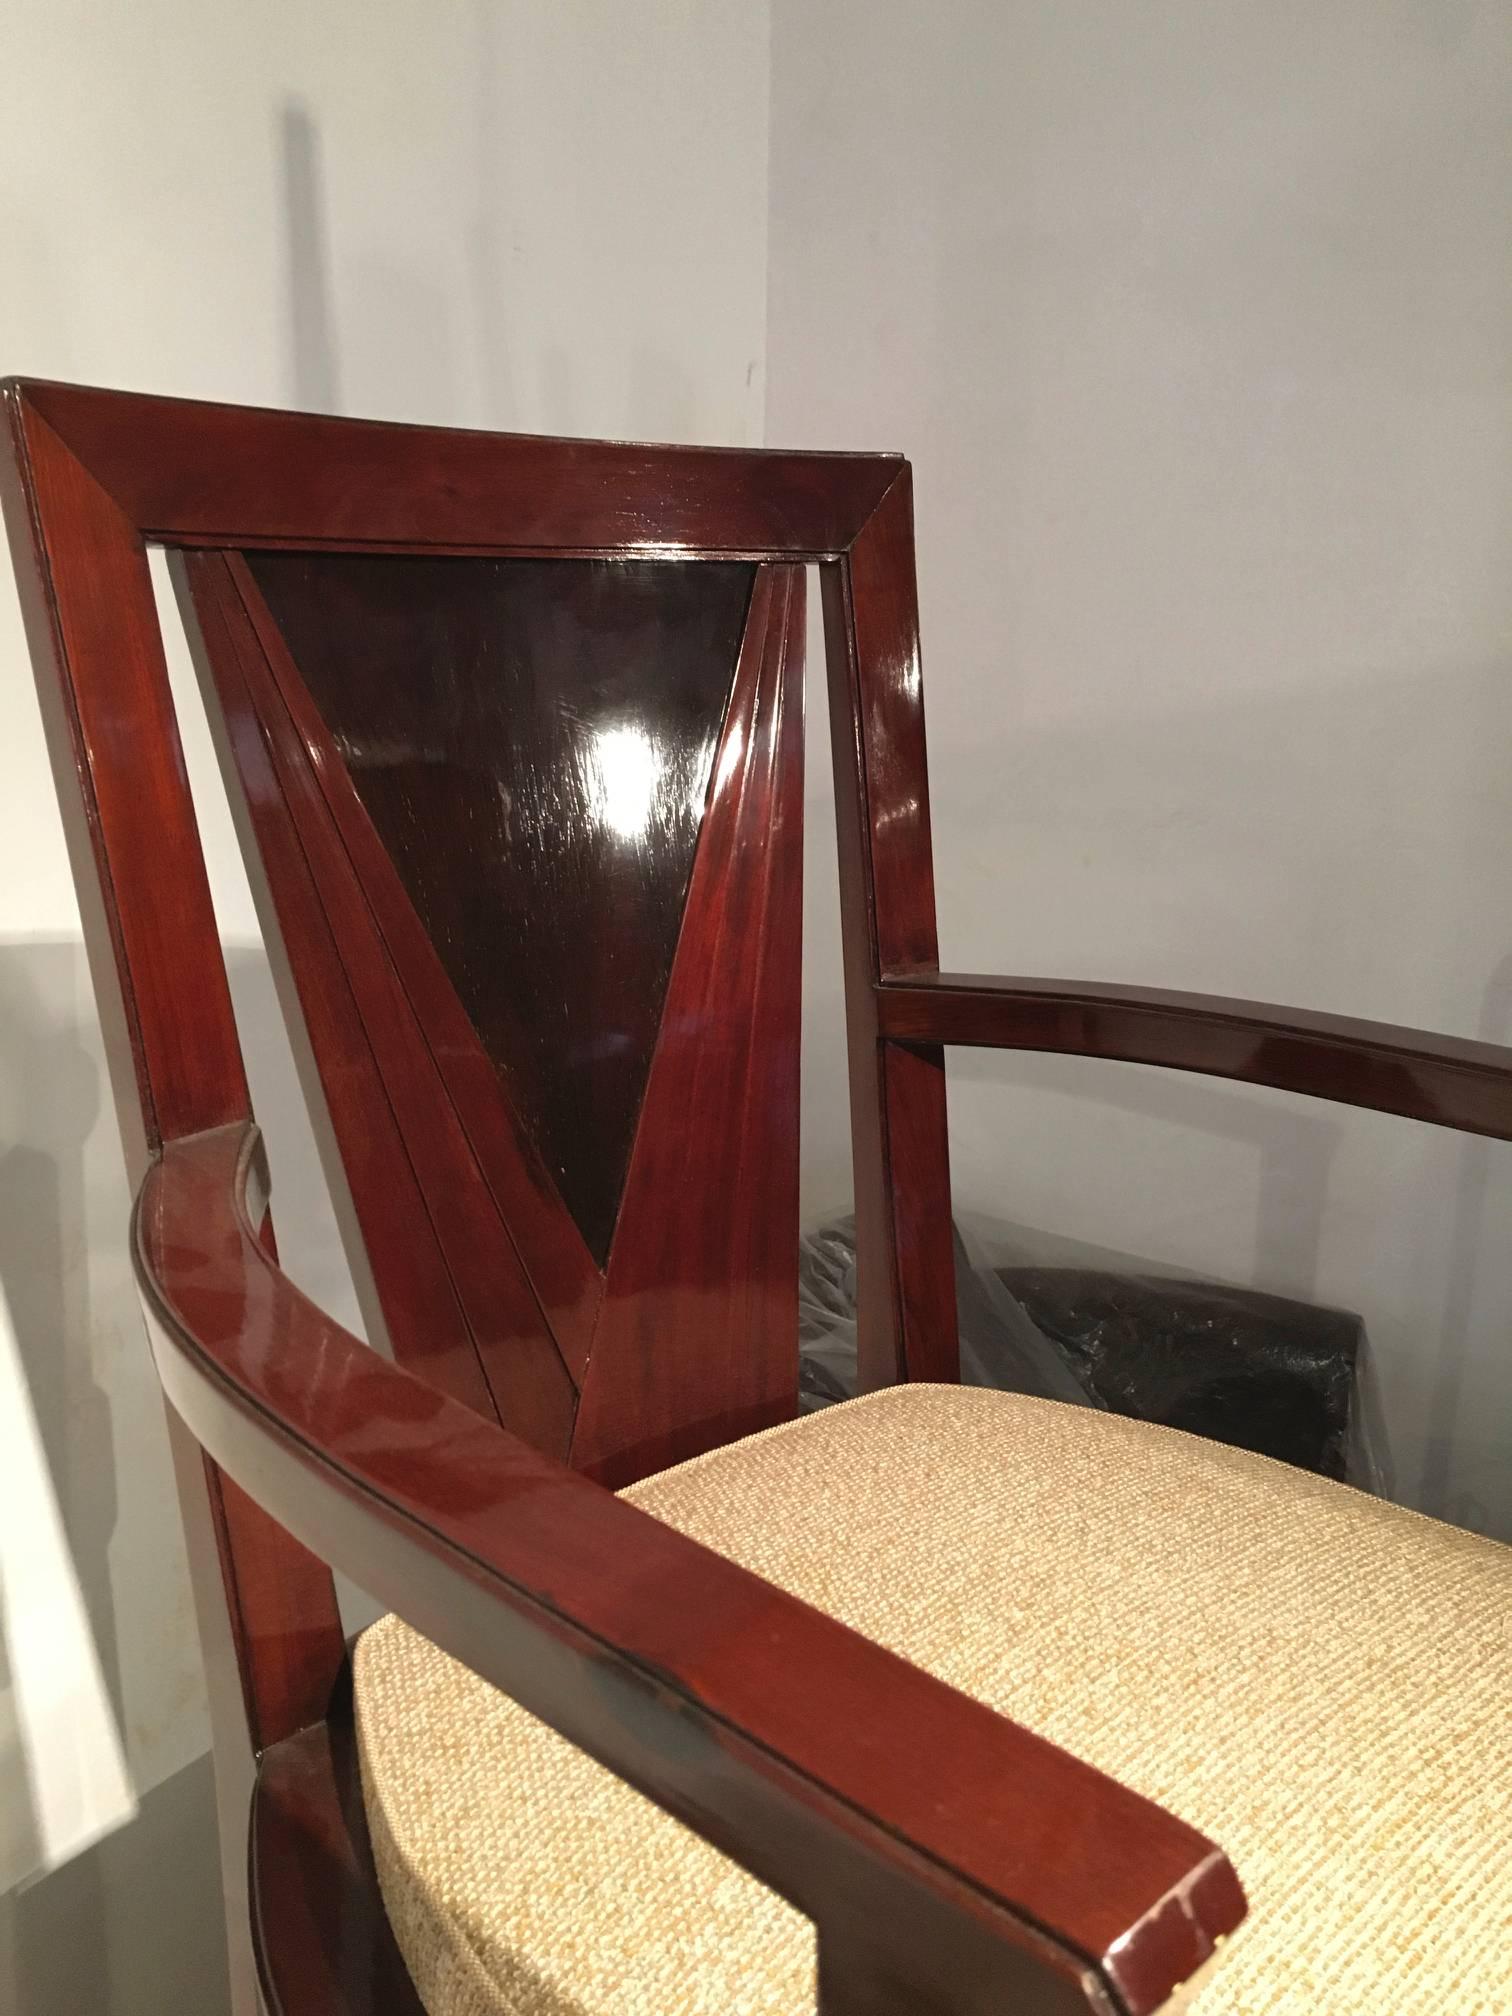 Maison Dominique Rarest Stamped Desk Chair in Mahogany and Makassar In Excellent Condition For Sale In Paris, ile de france